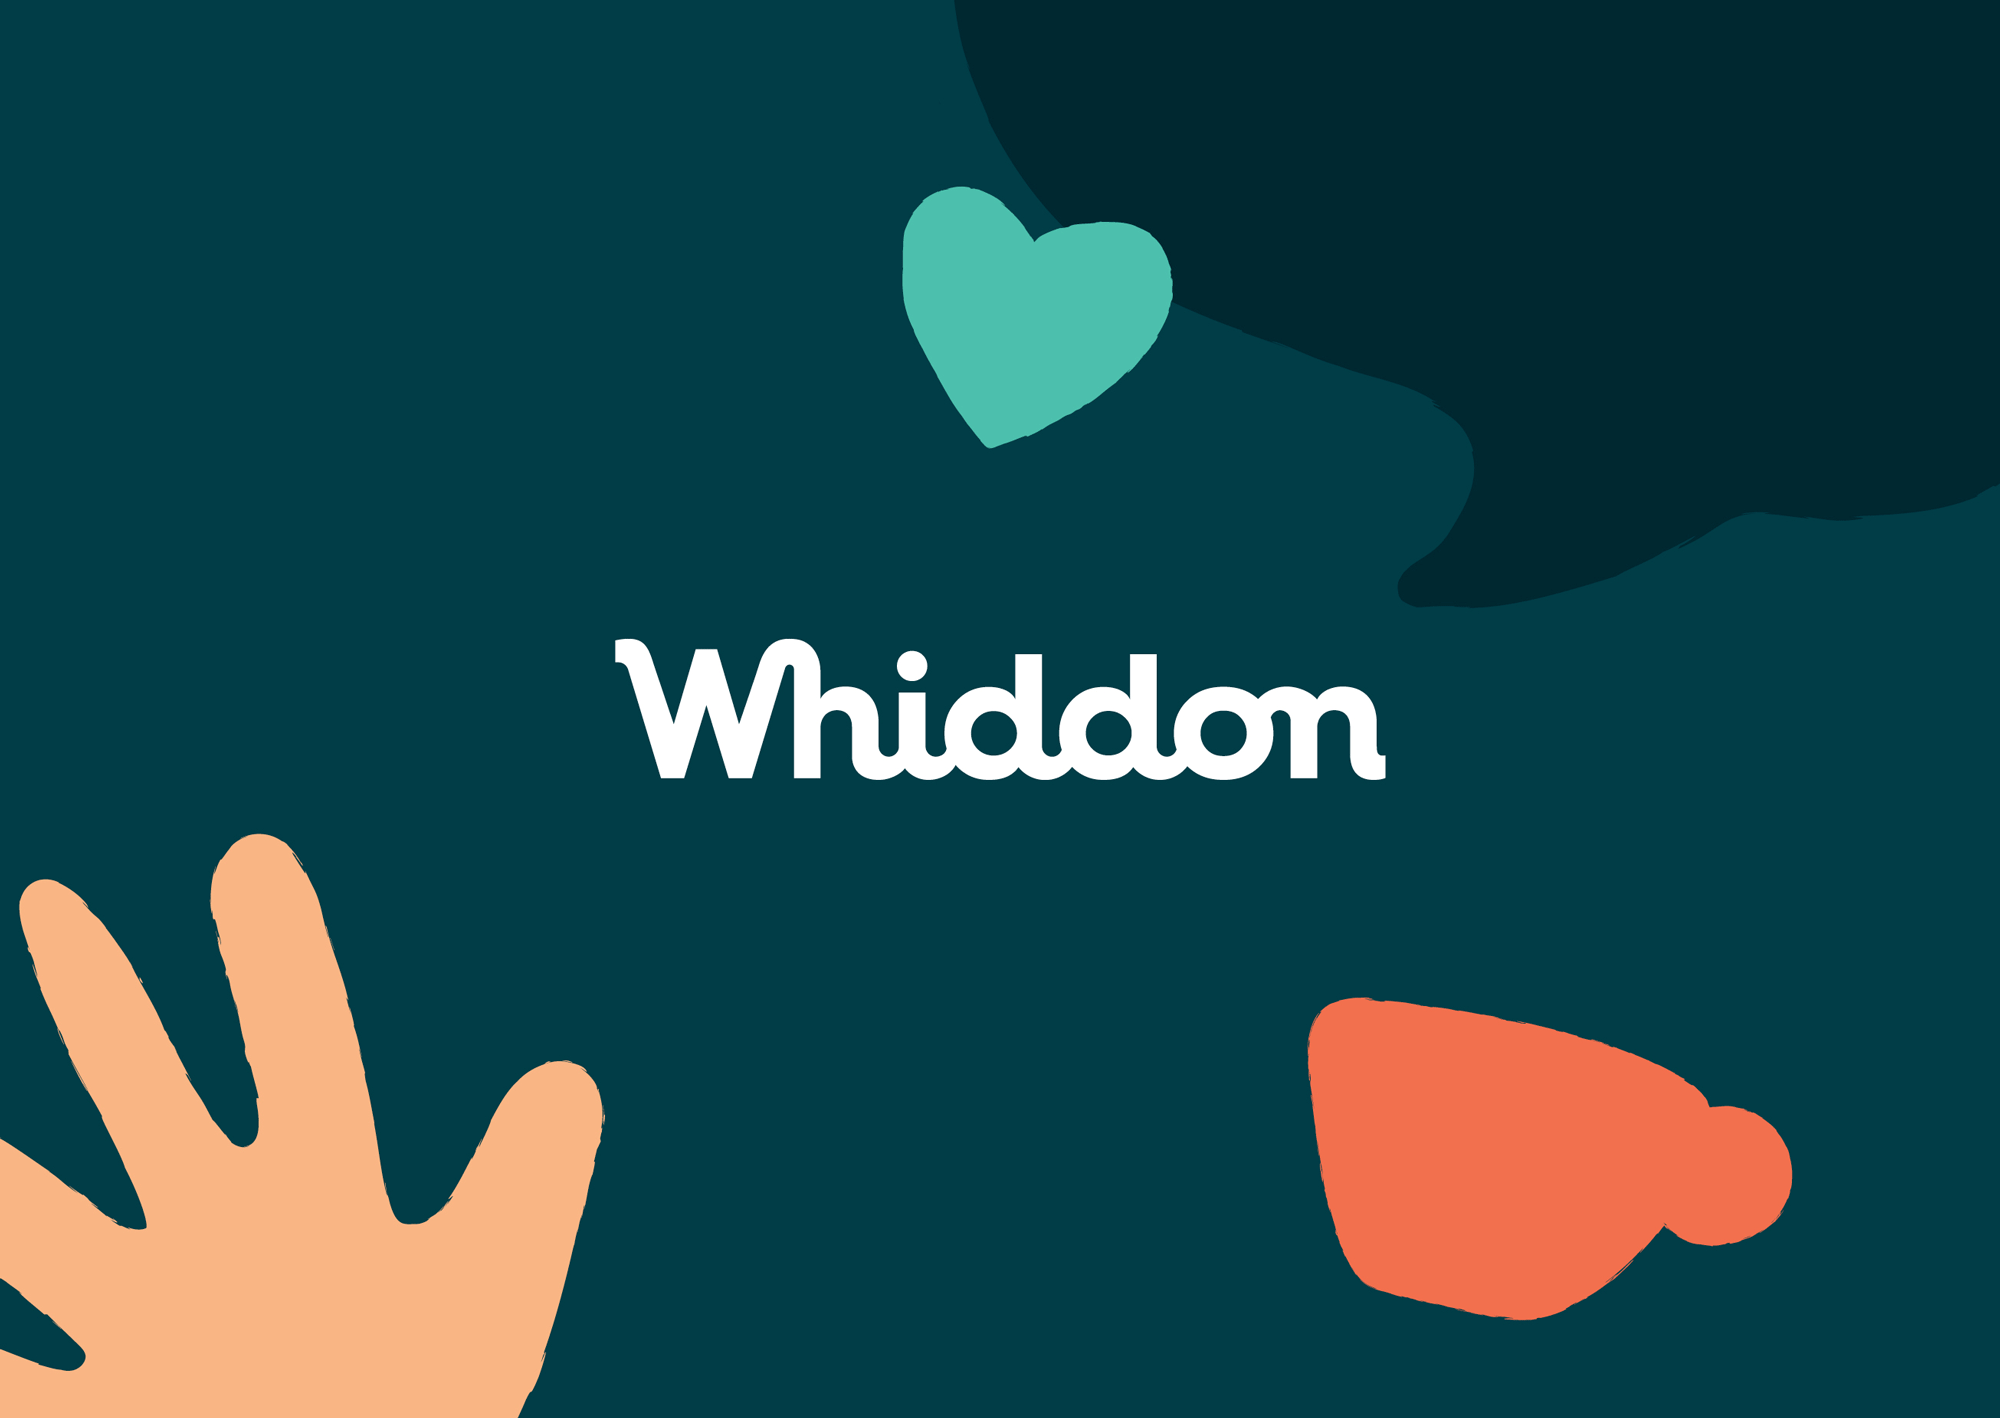 New Logo and Identity for Whiddon by THERE